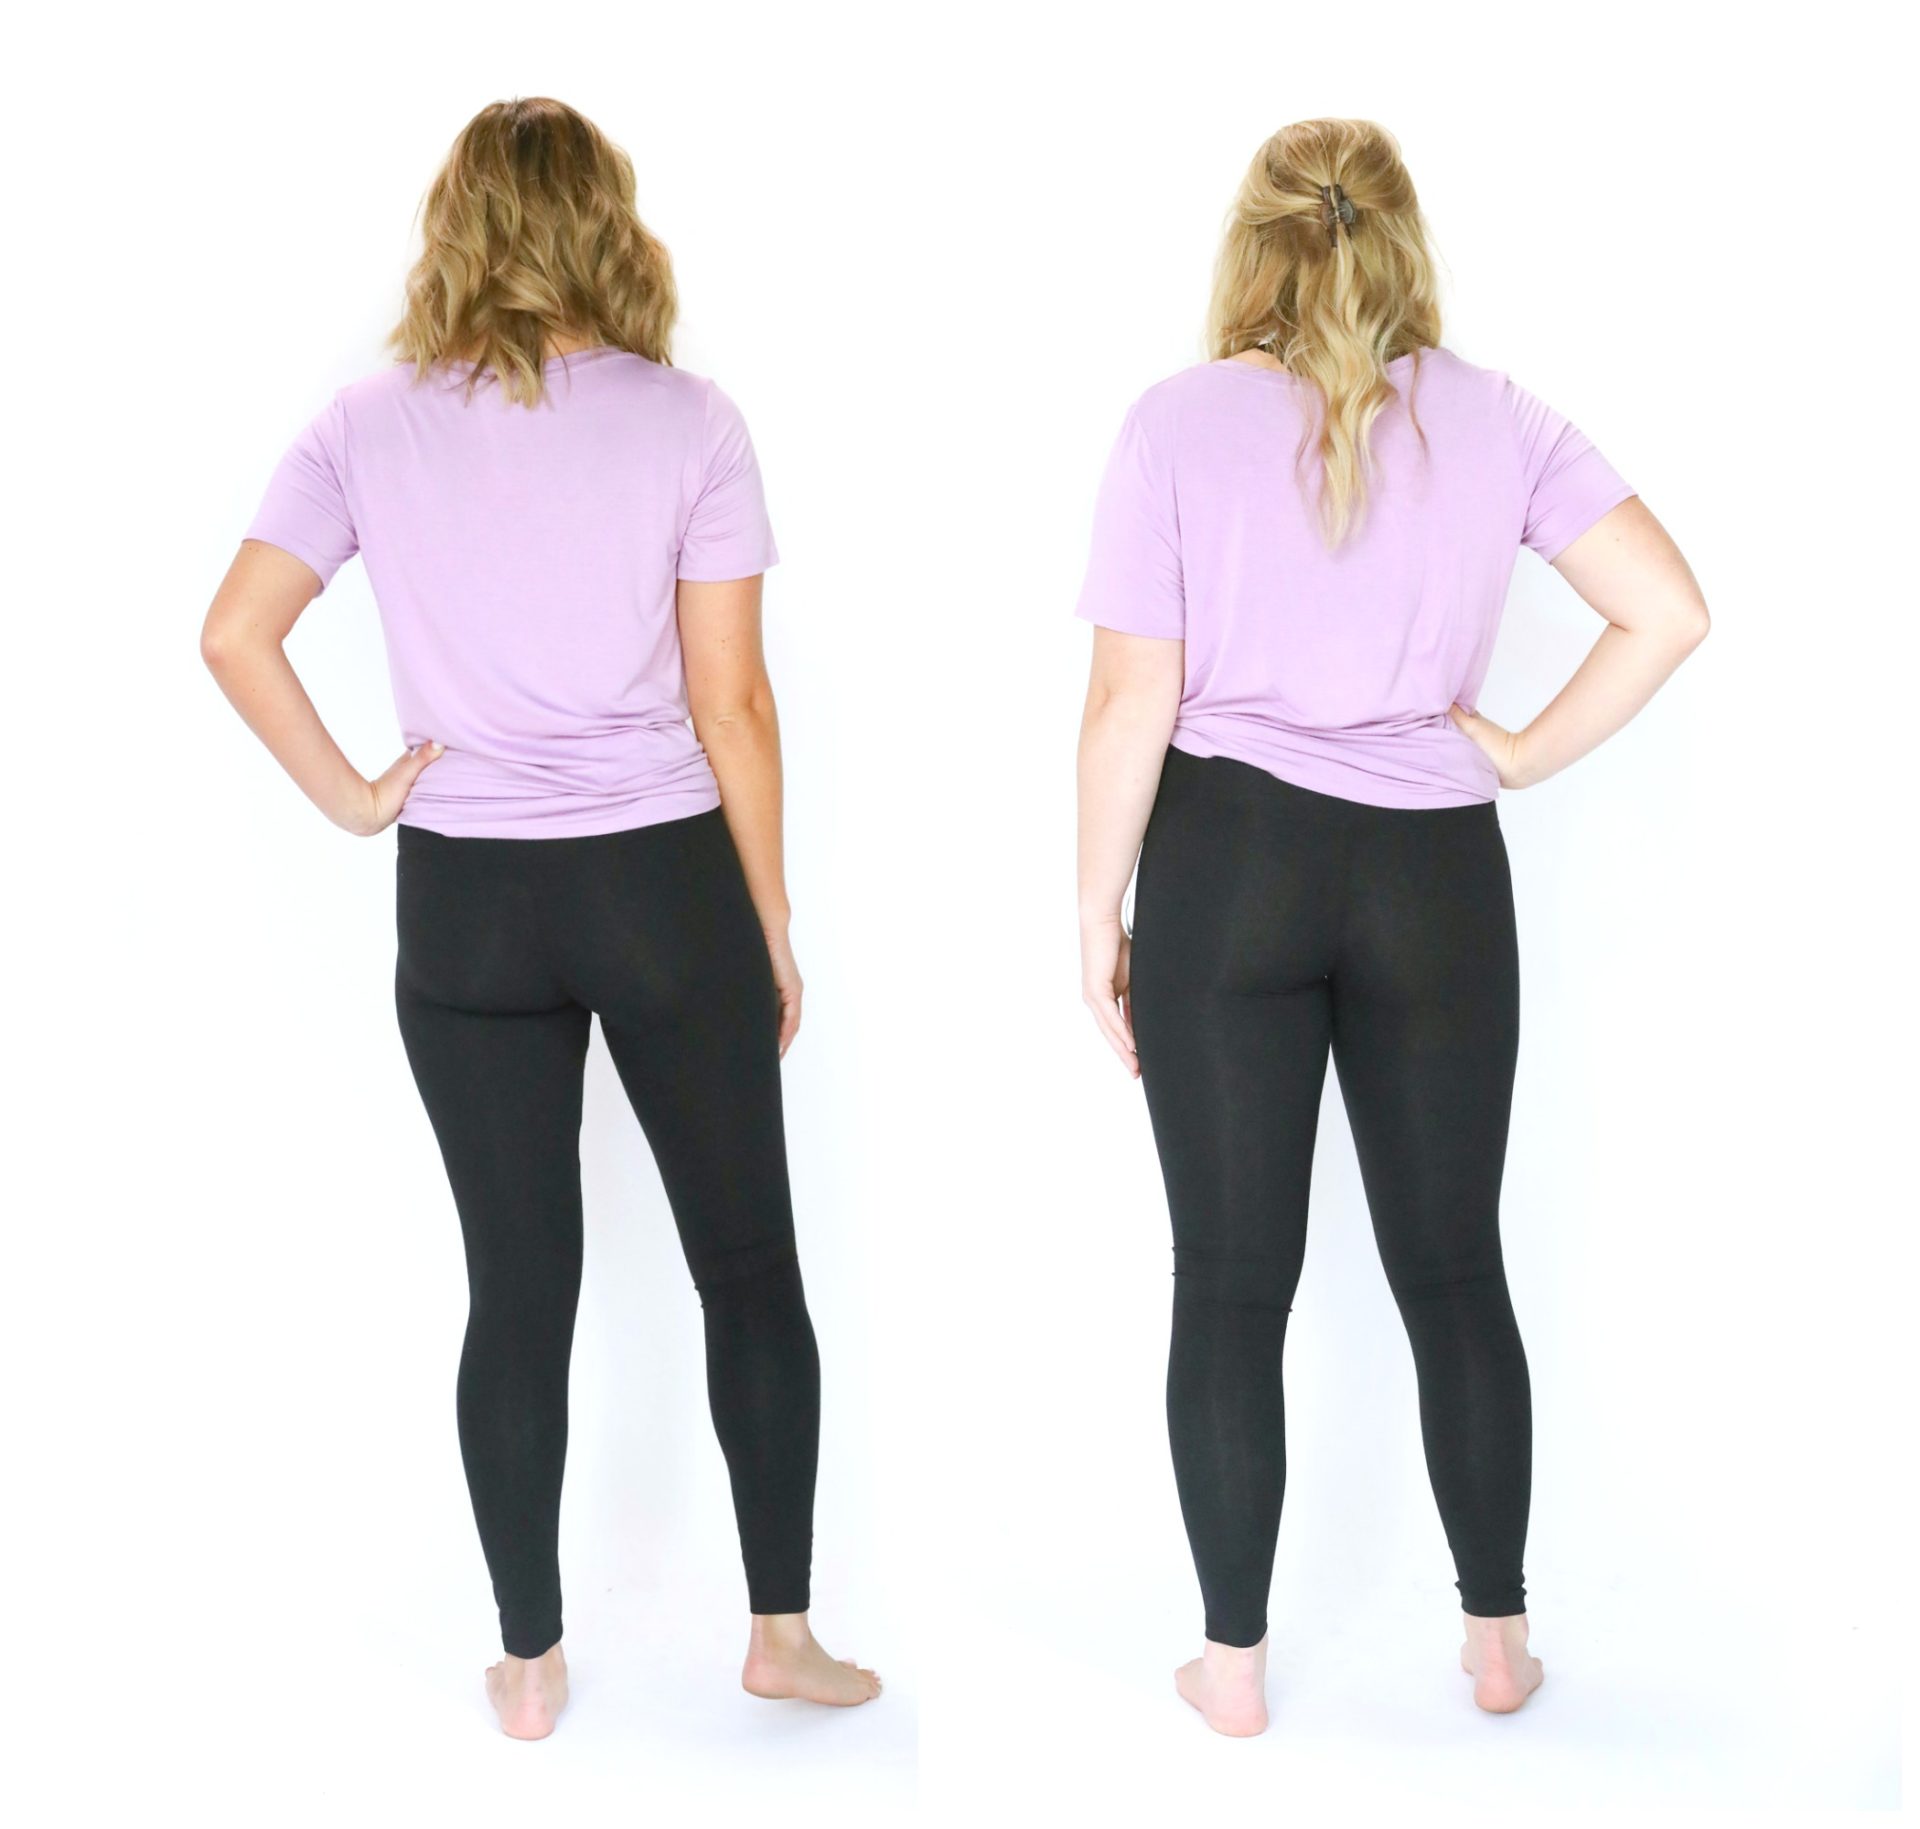 What is the difference between Tights and Leggings?